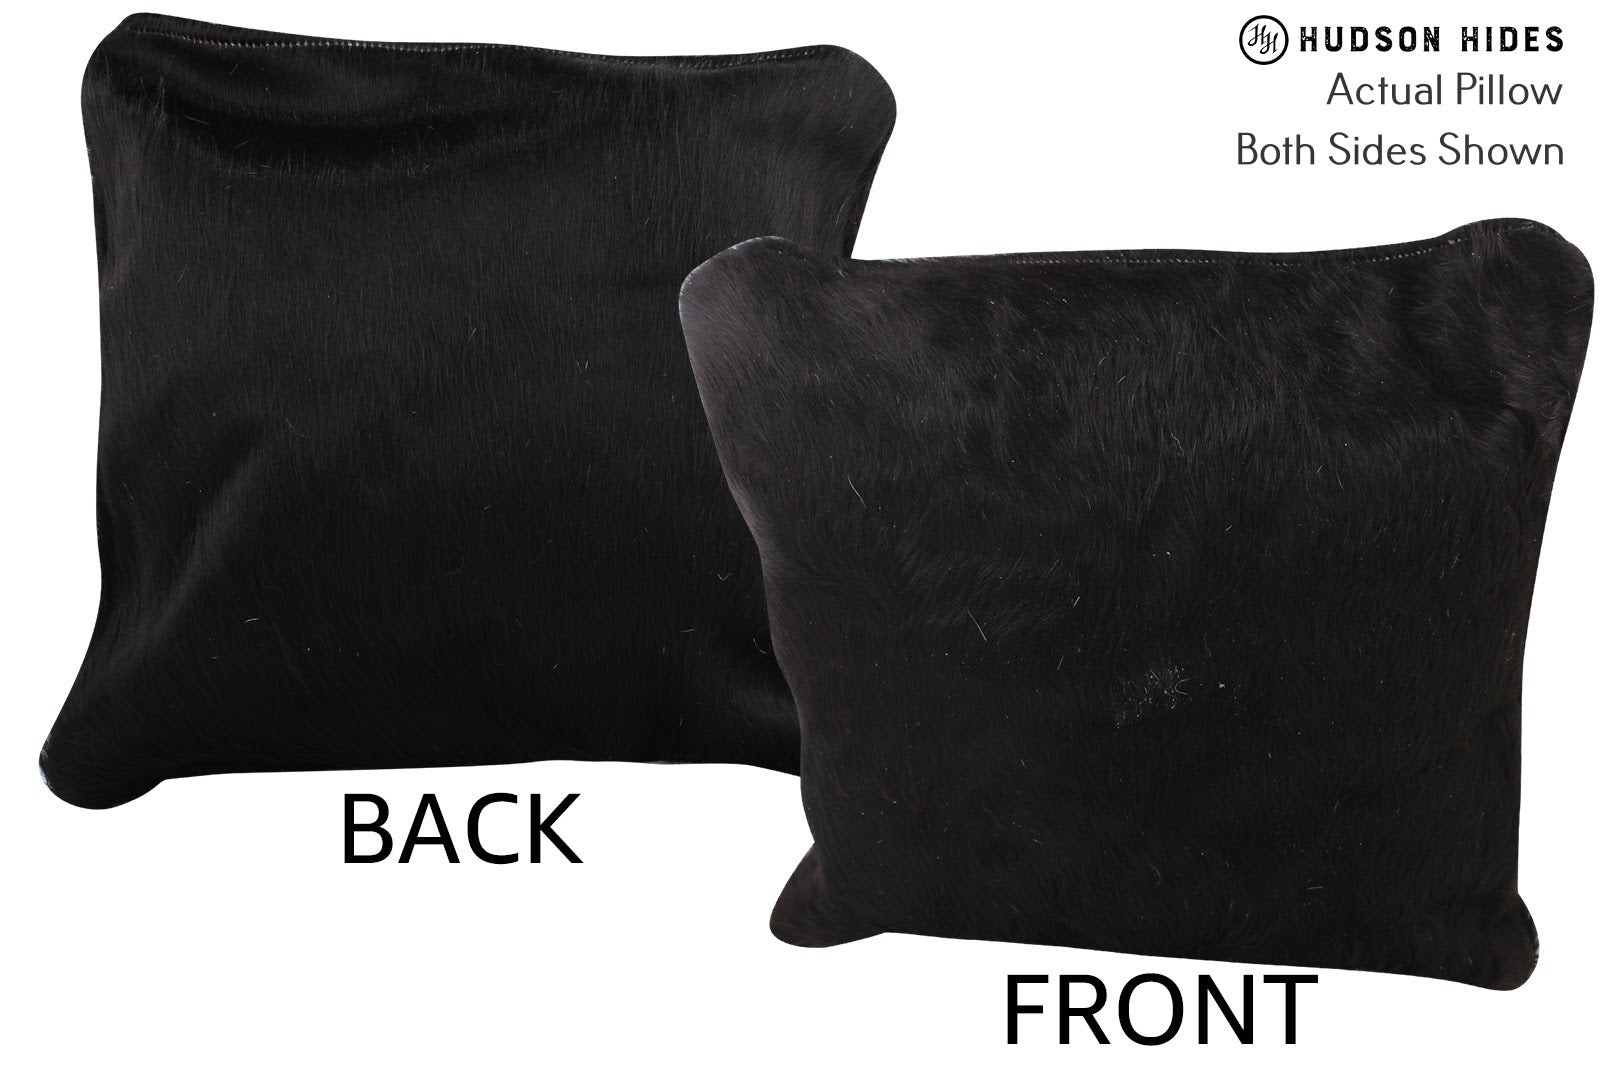 Solid Black Cowhide Pillow #74773